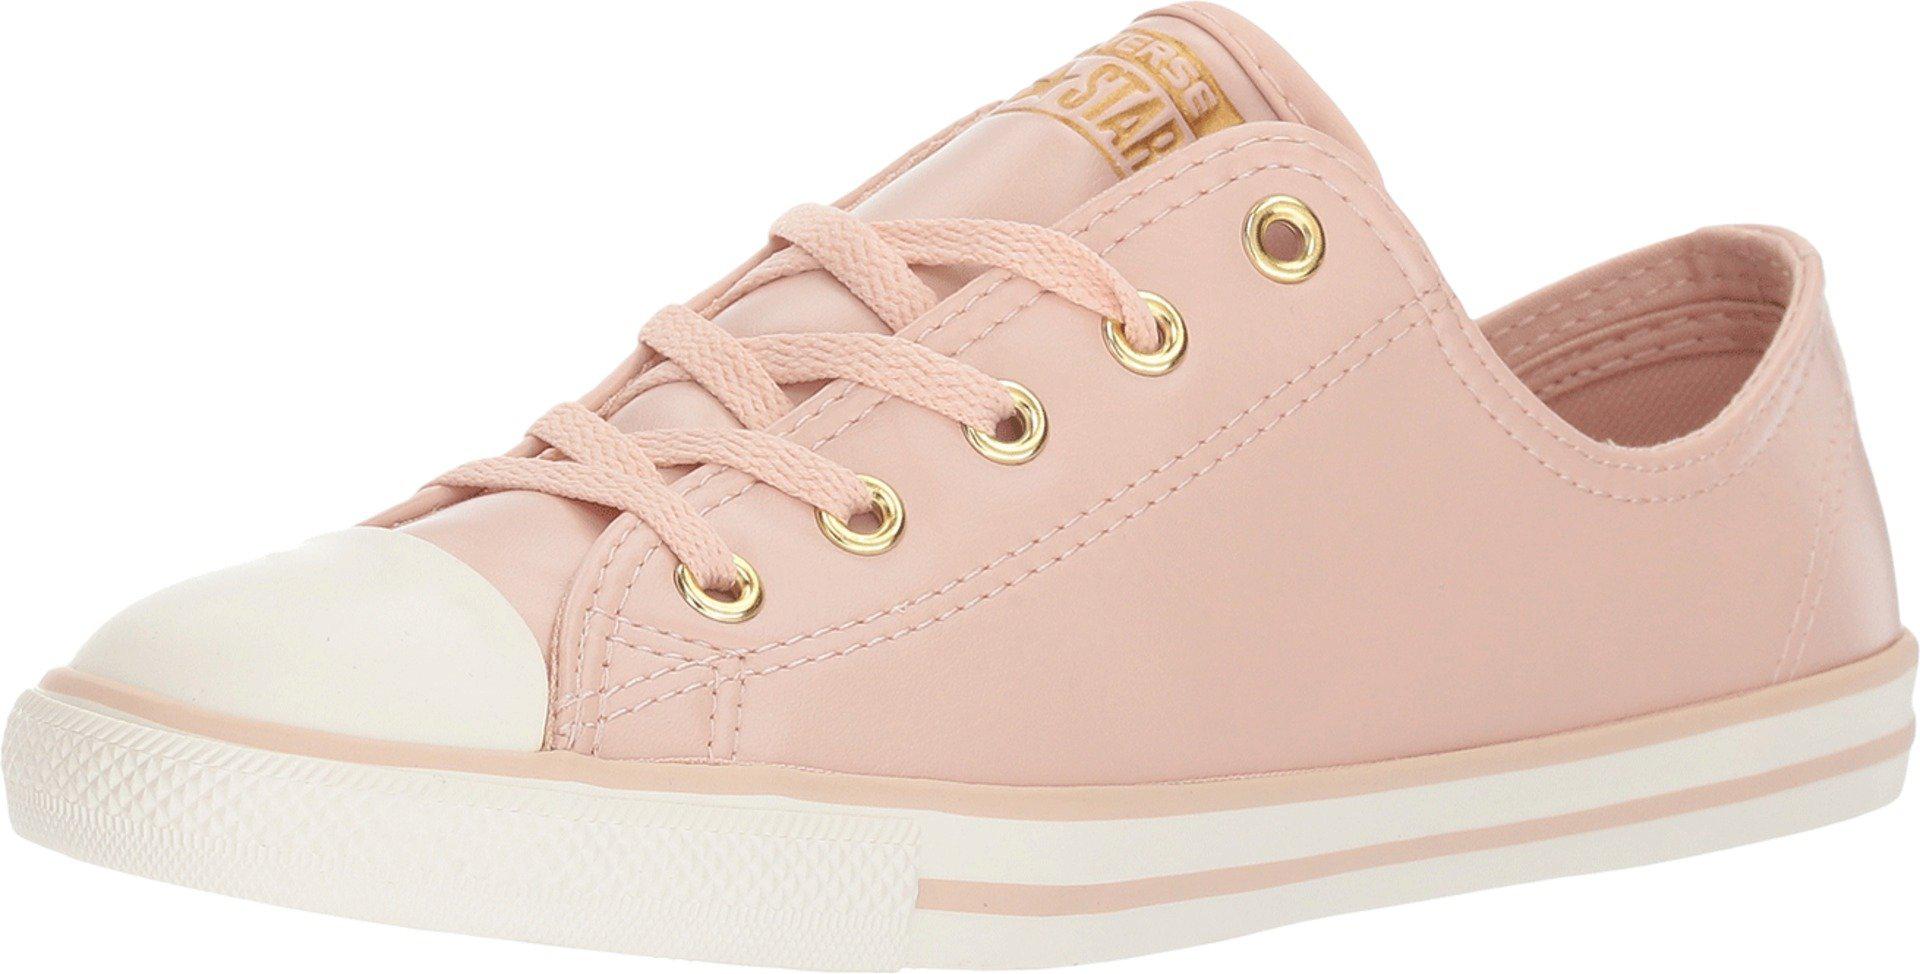 Converse Leather Chuck Taylor All Star Dainty - Ox Craft Sl in Pink - Lyst